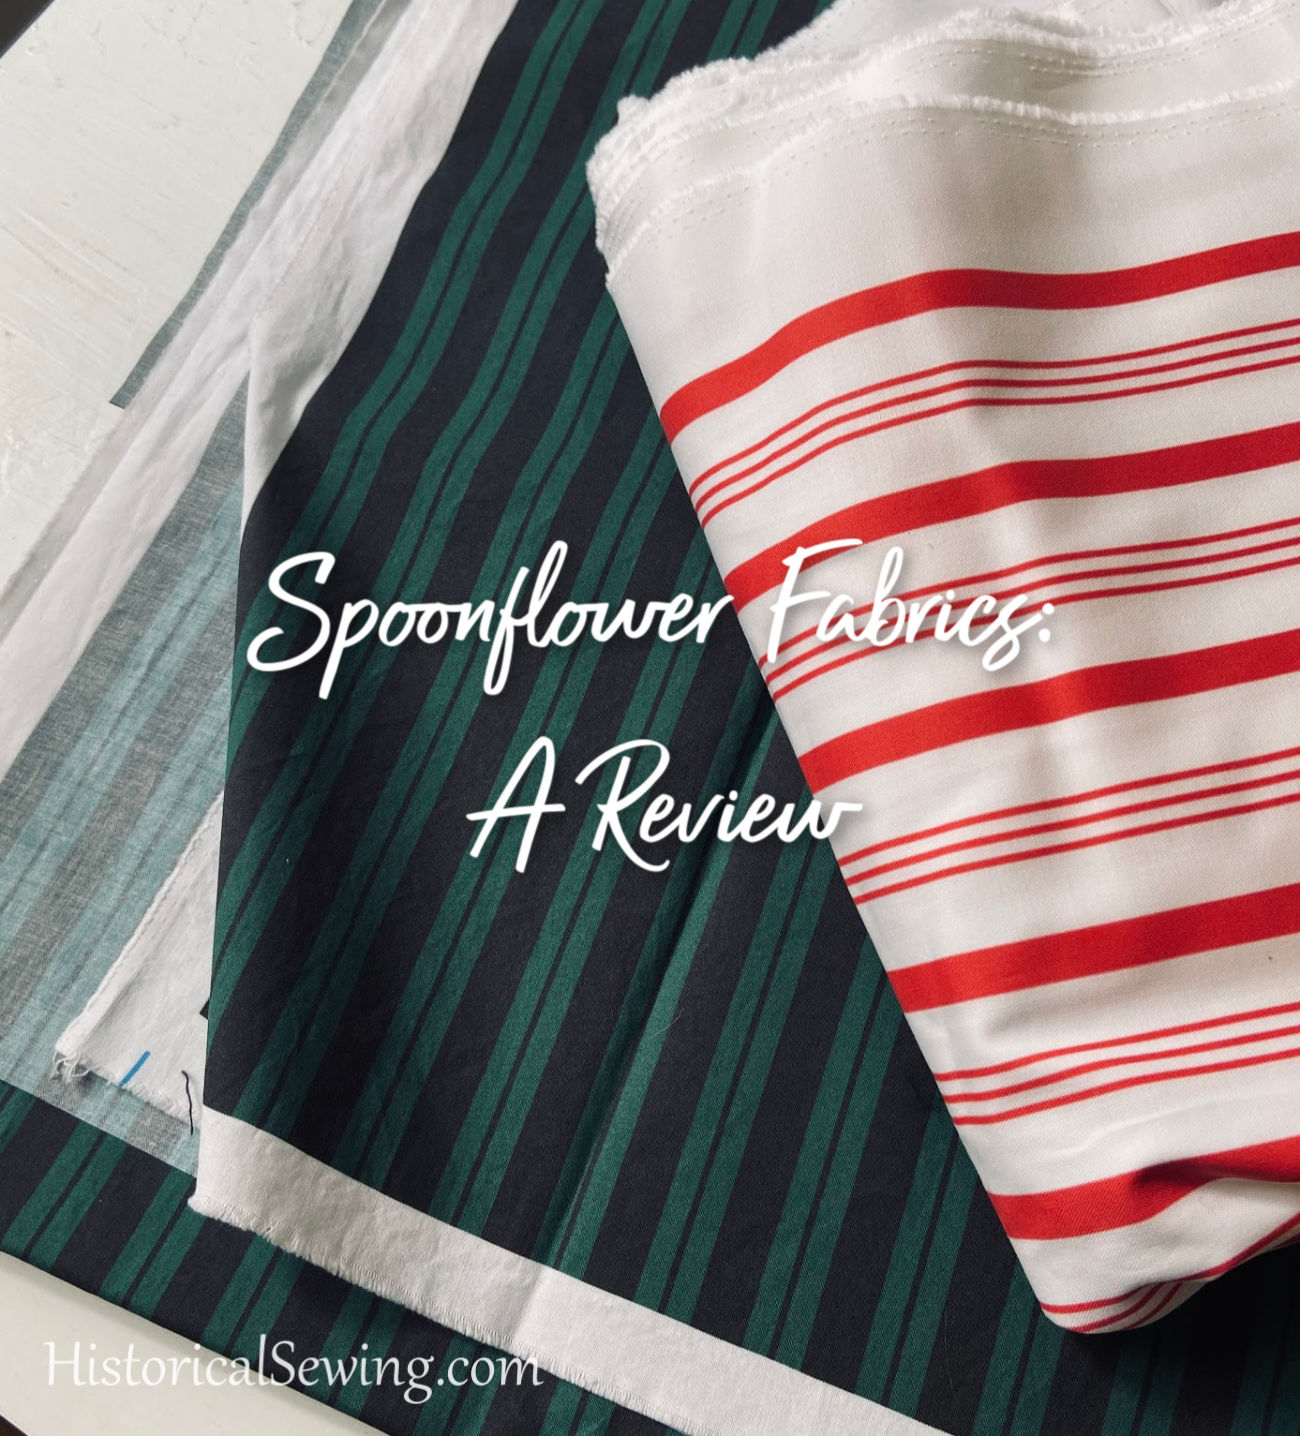 Spoonflower Fabrics: My First Experiences – Historical Sewing